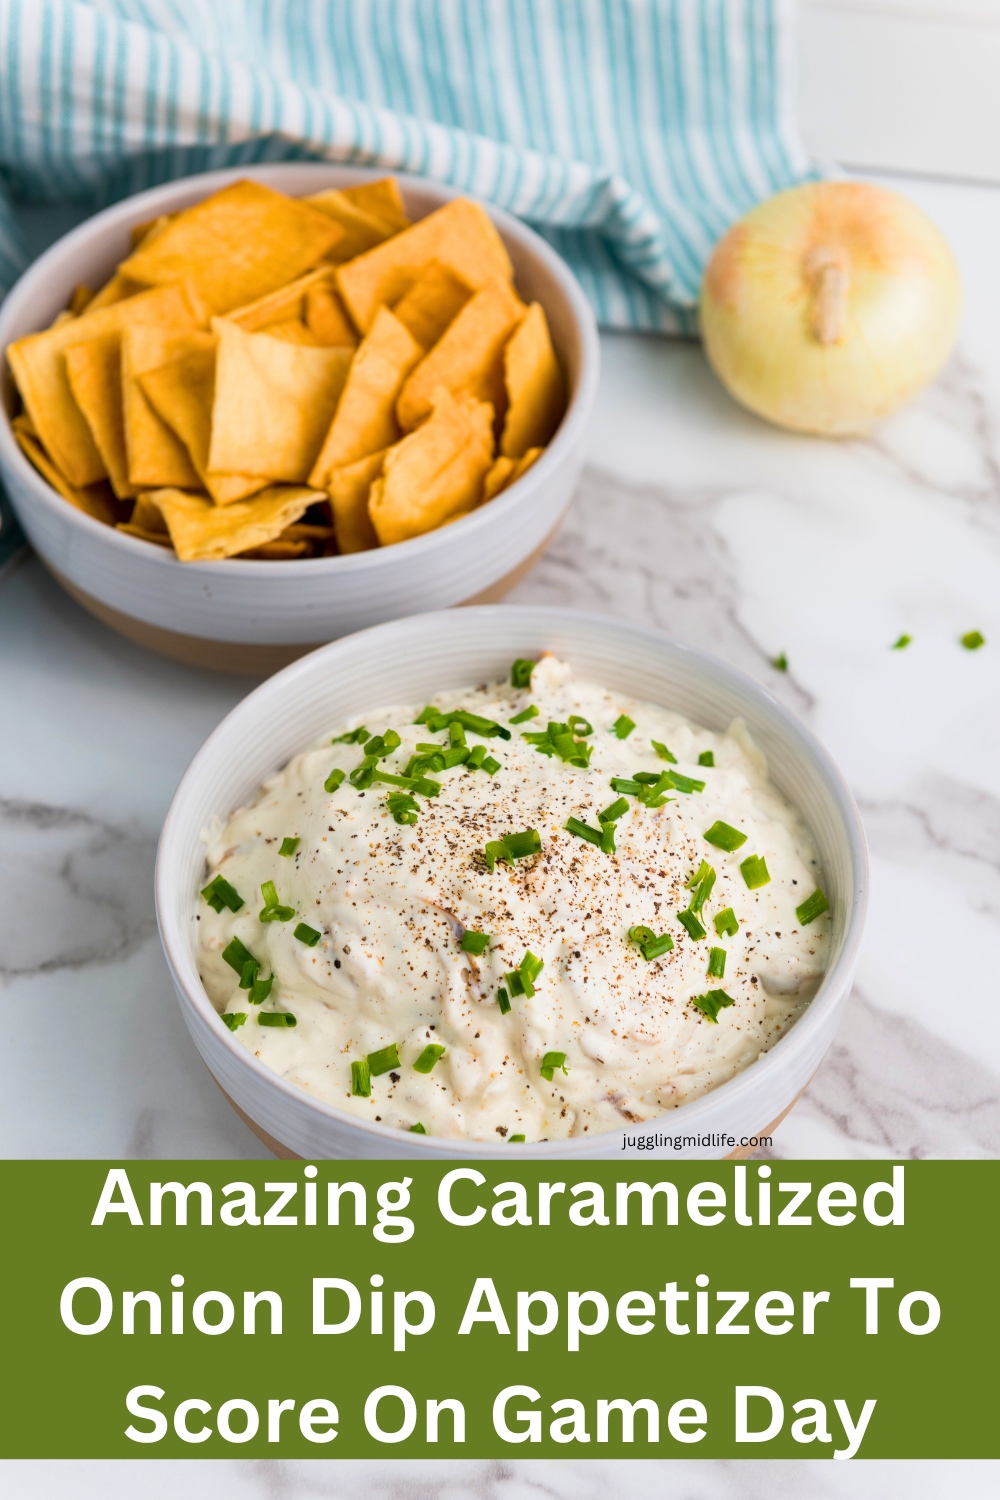 caramelized onion dip recipe appetizer big game day